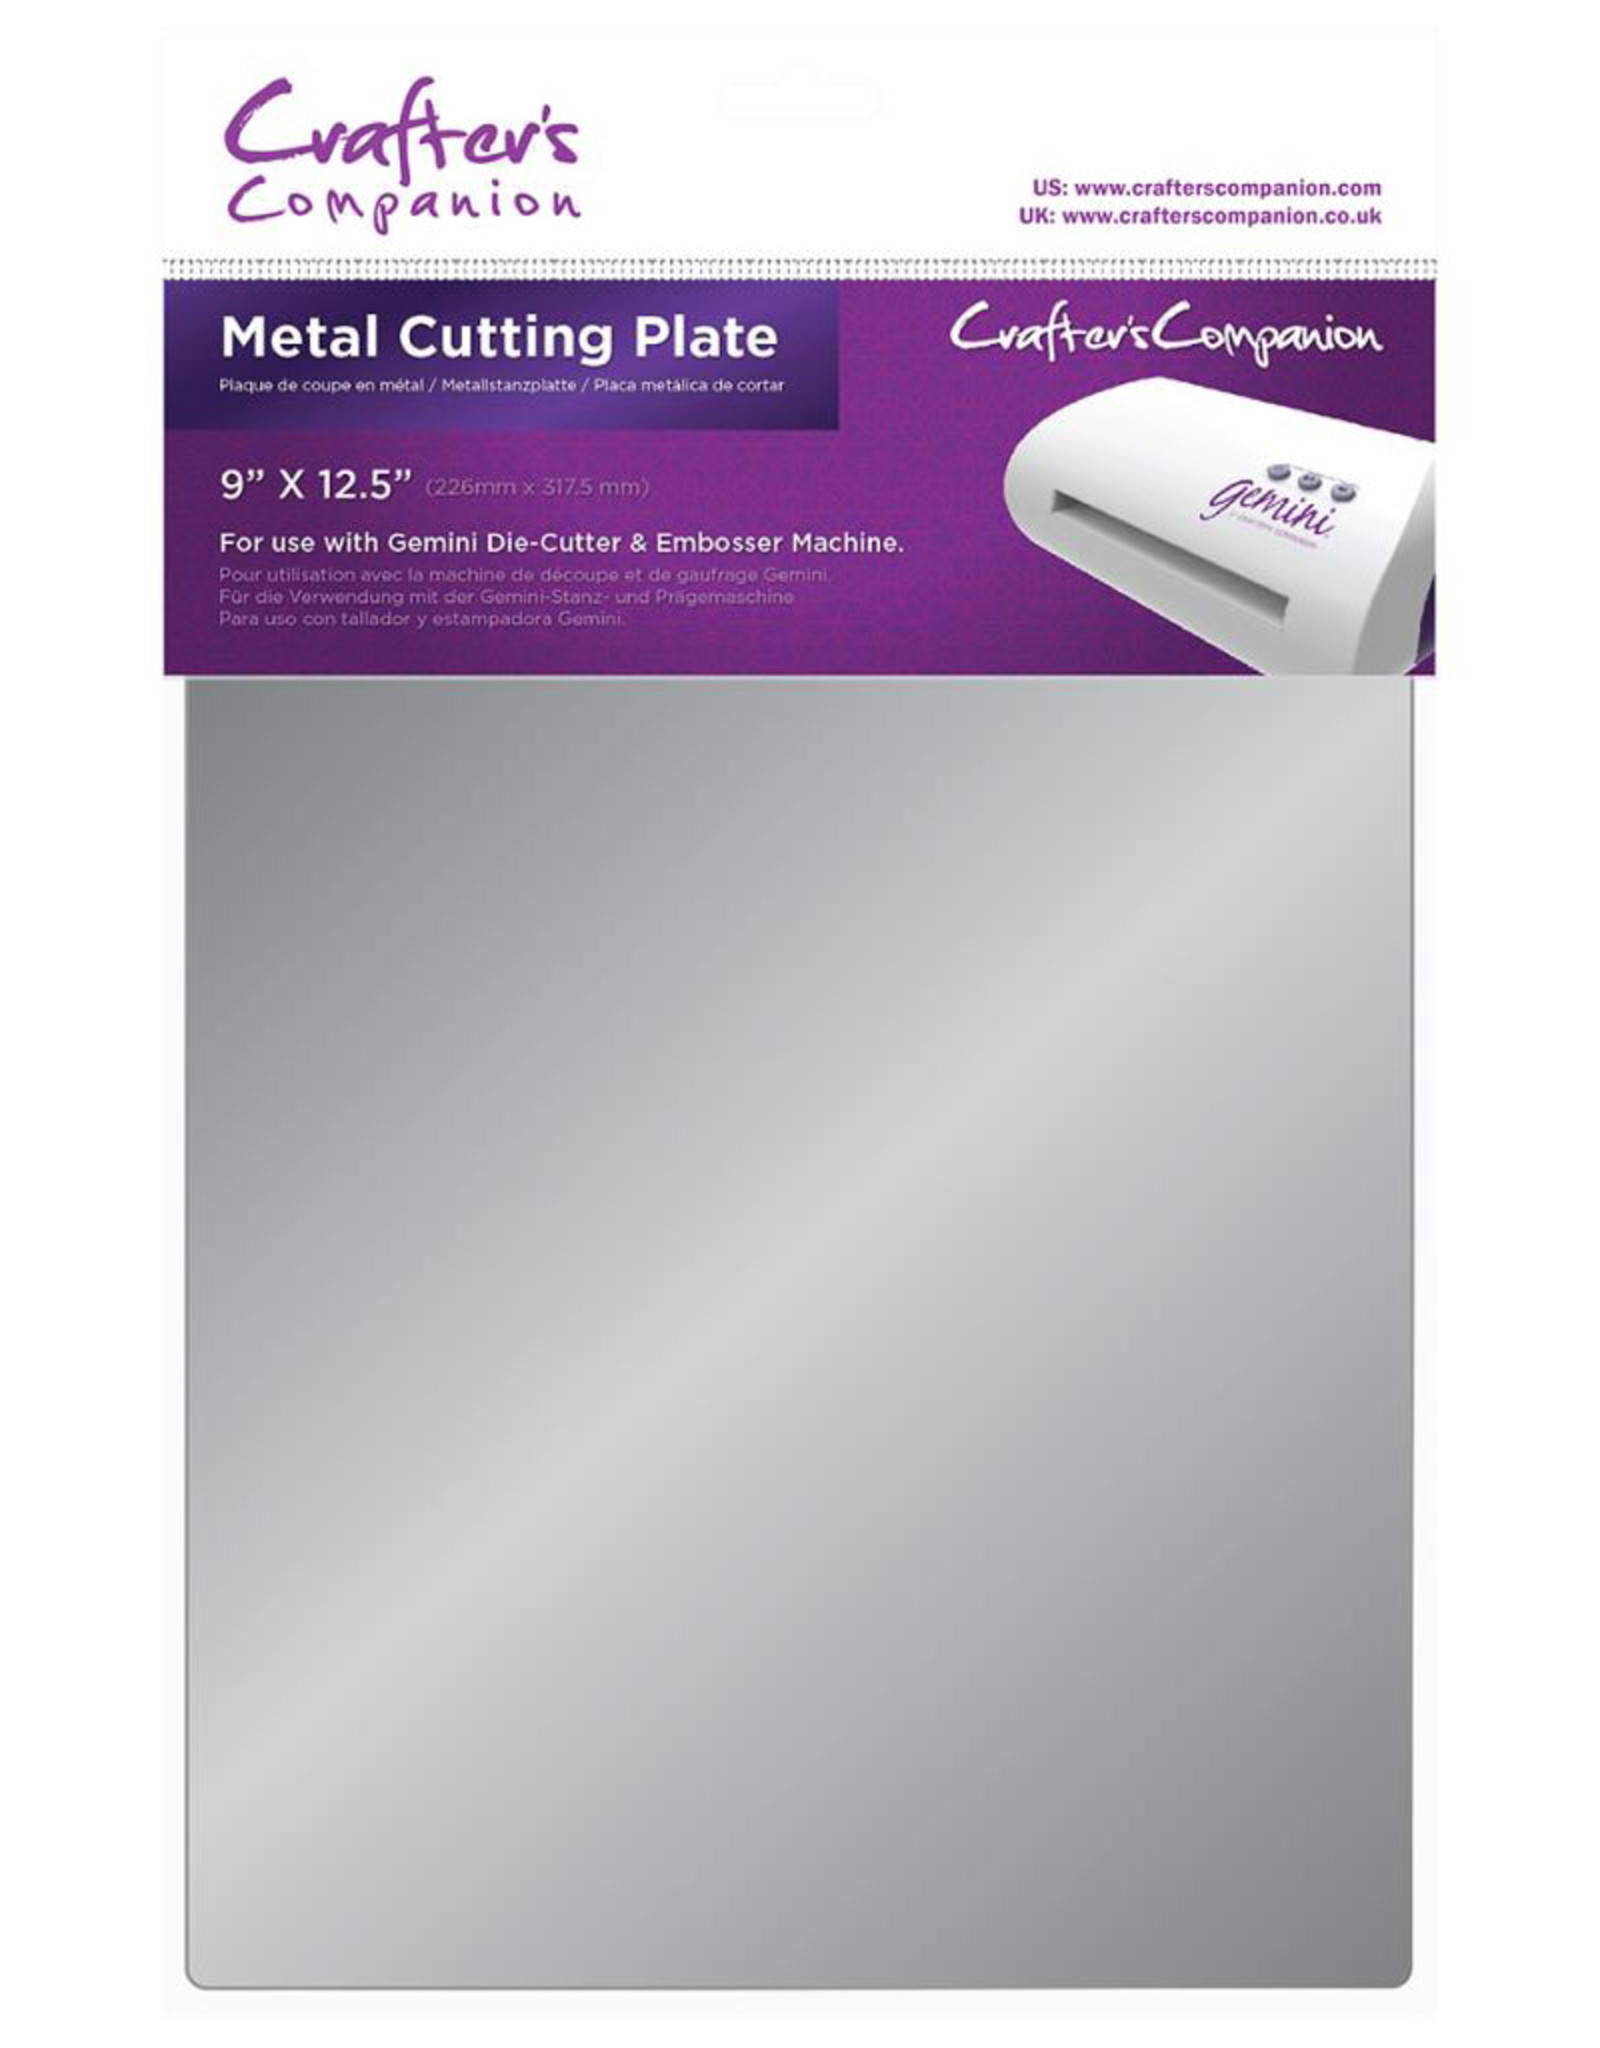 CRAFTERS COMPANION CRAFTER'S COMPANION METAL CUTTING PLATE FOR GEMINI